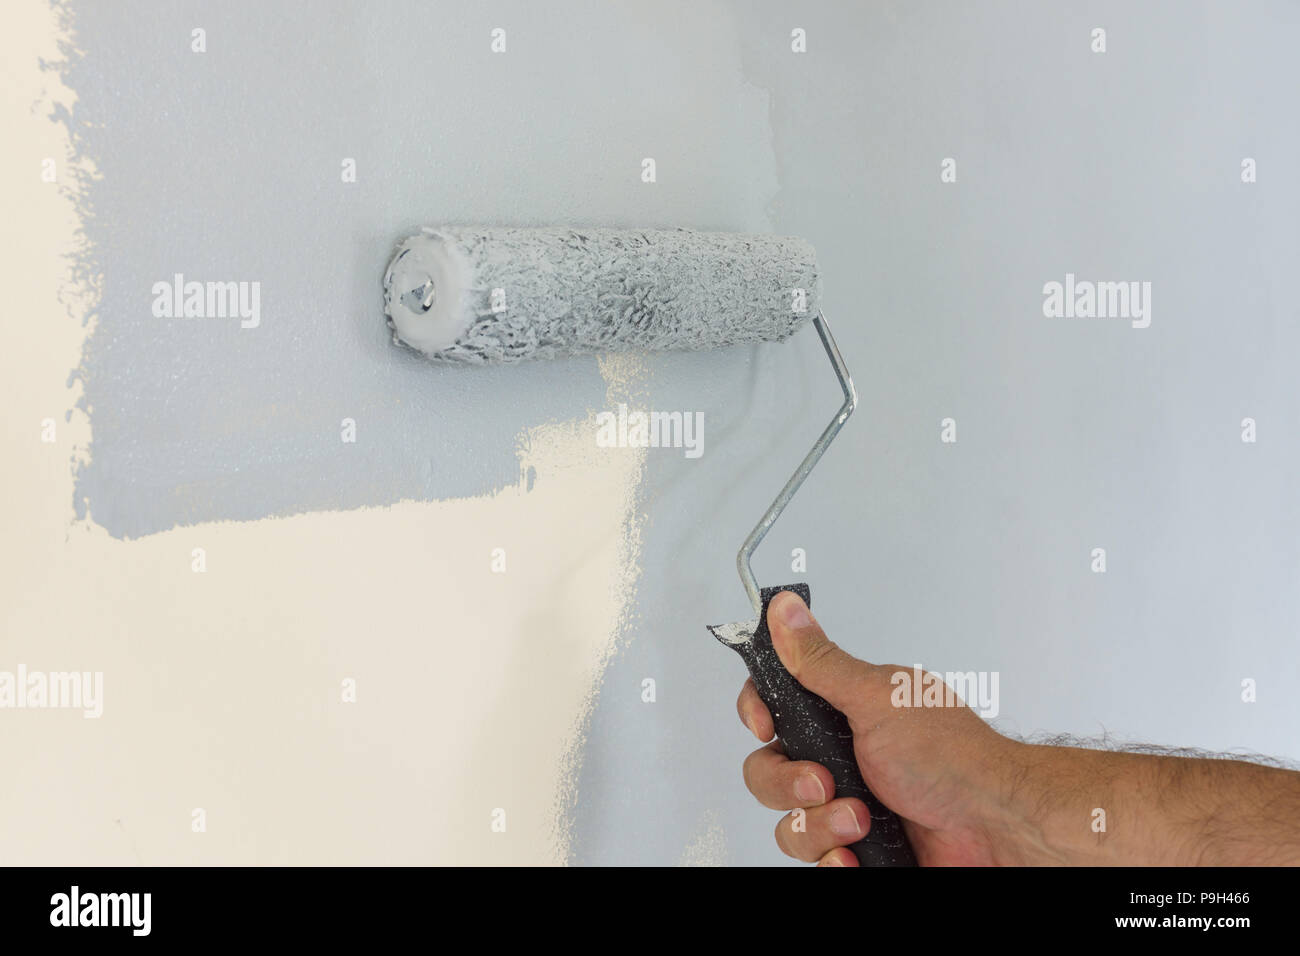 Painting and decorating an interior wall with a roller and modern light grey paint Stock Photo